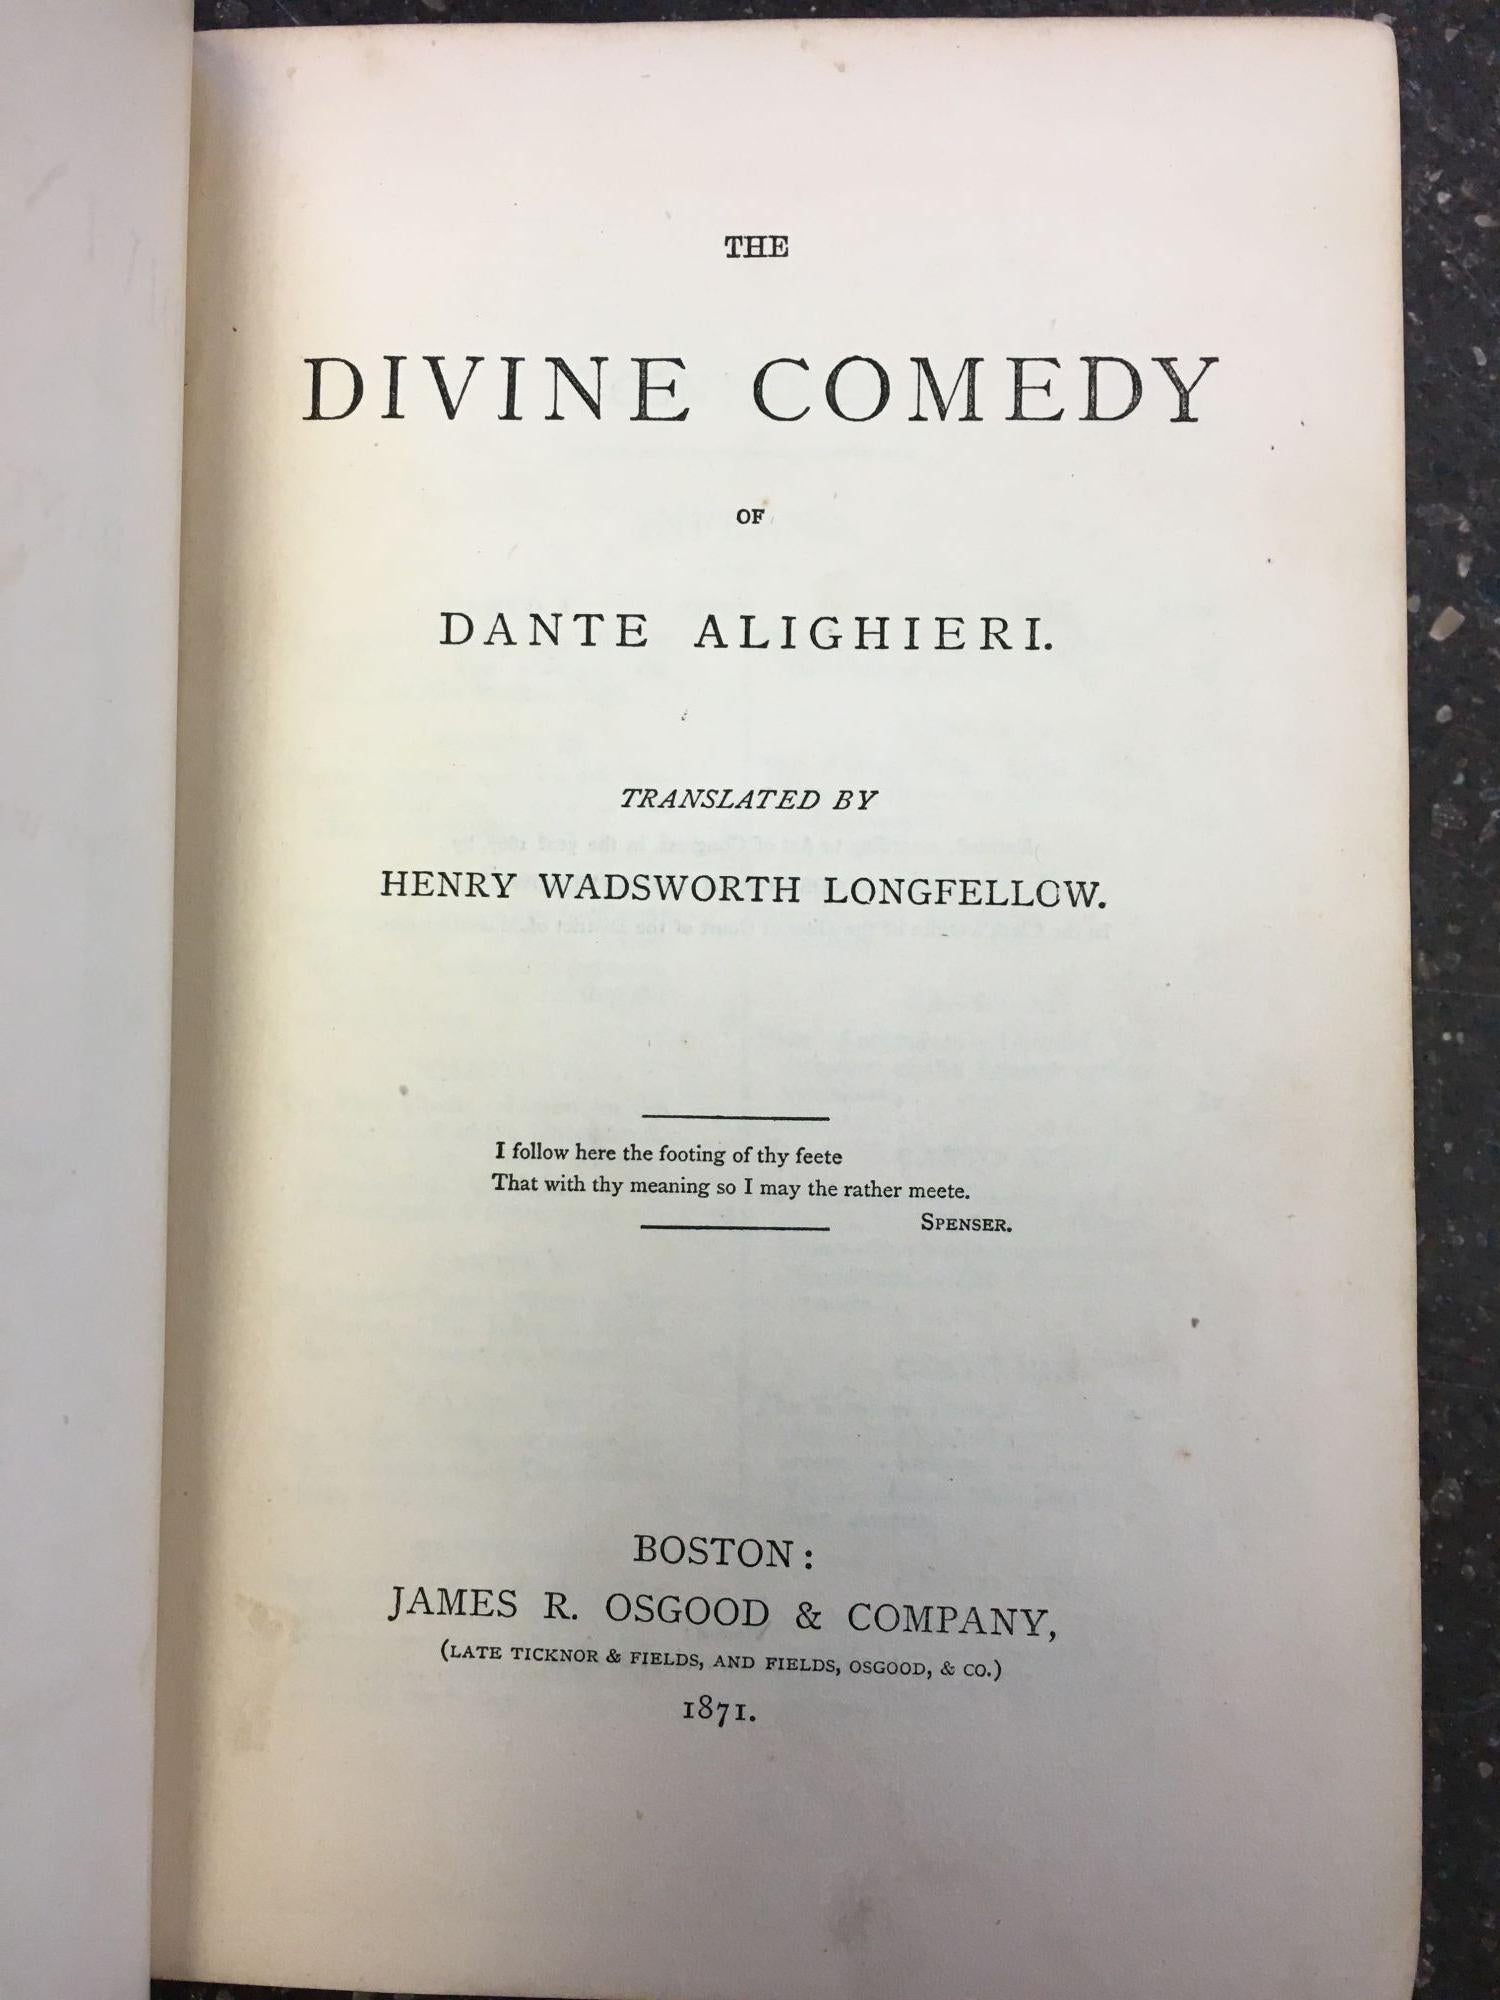 PDF) The Divine Comedy of Dante Alighieri. Translated and commented by  Henry Wadsworth Longfellow - Text